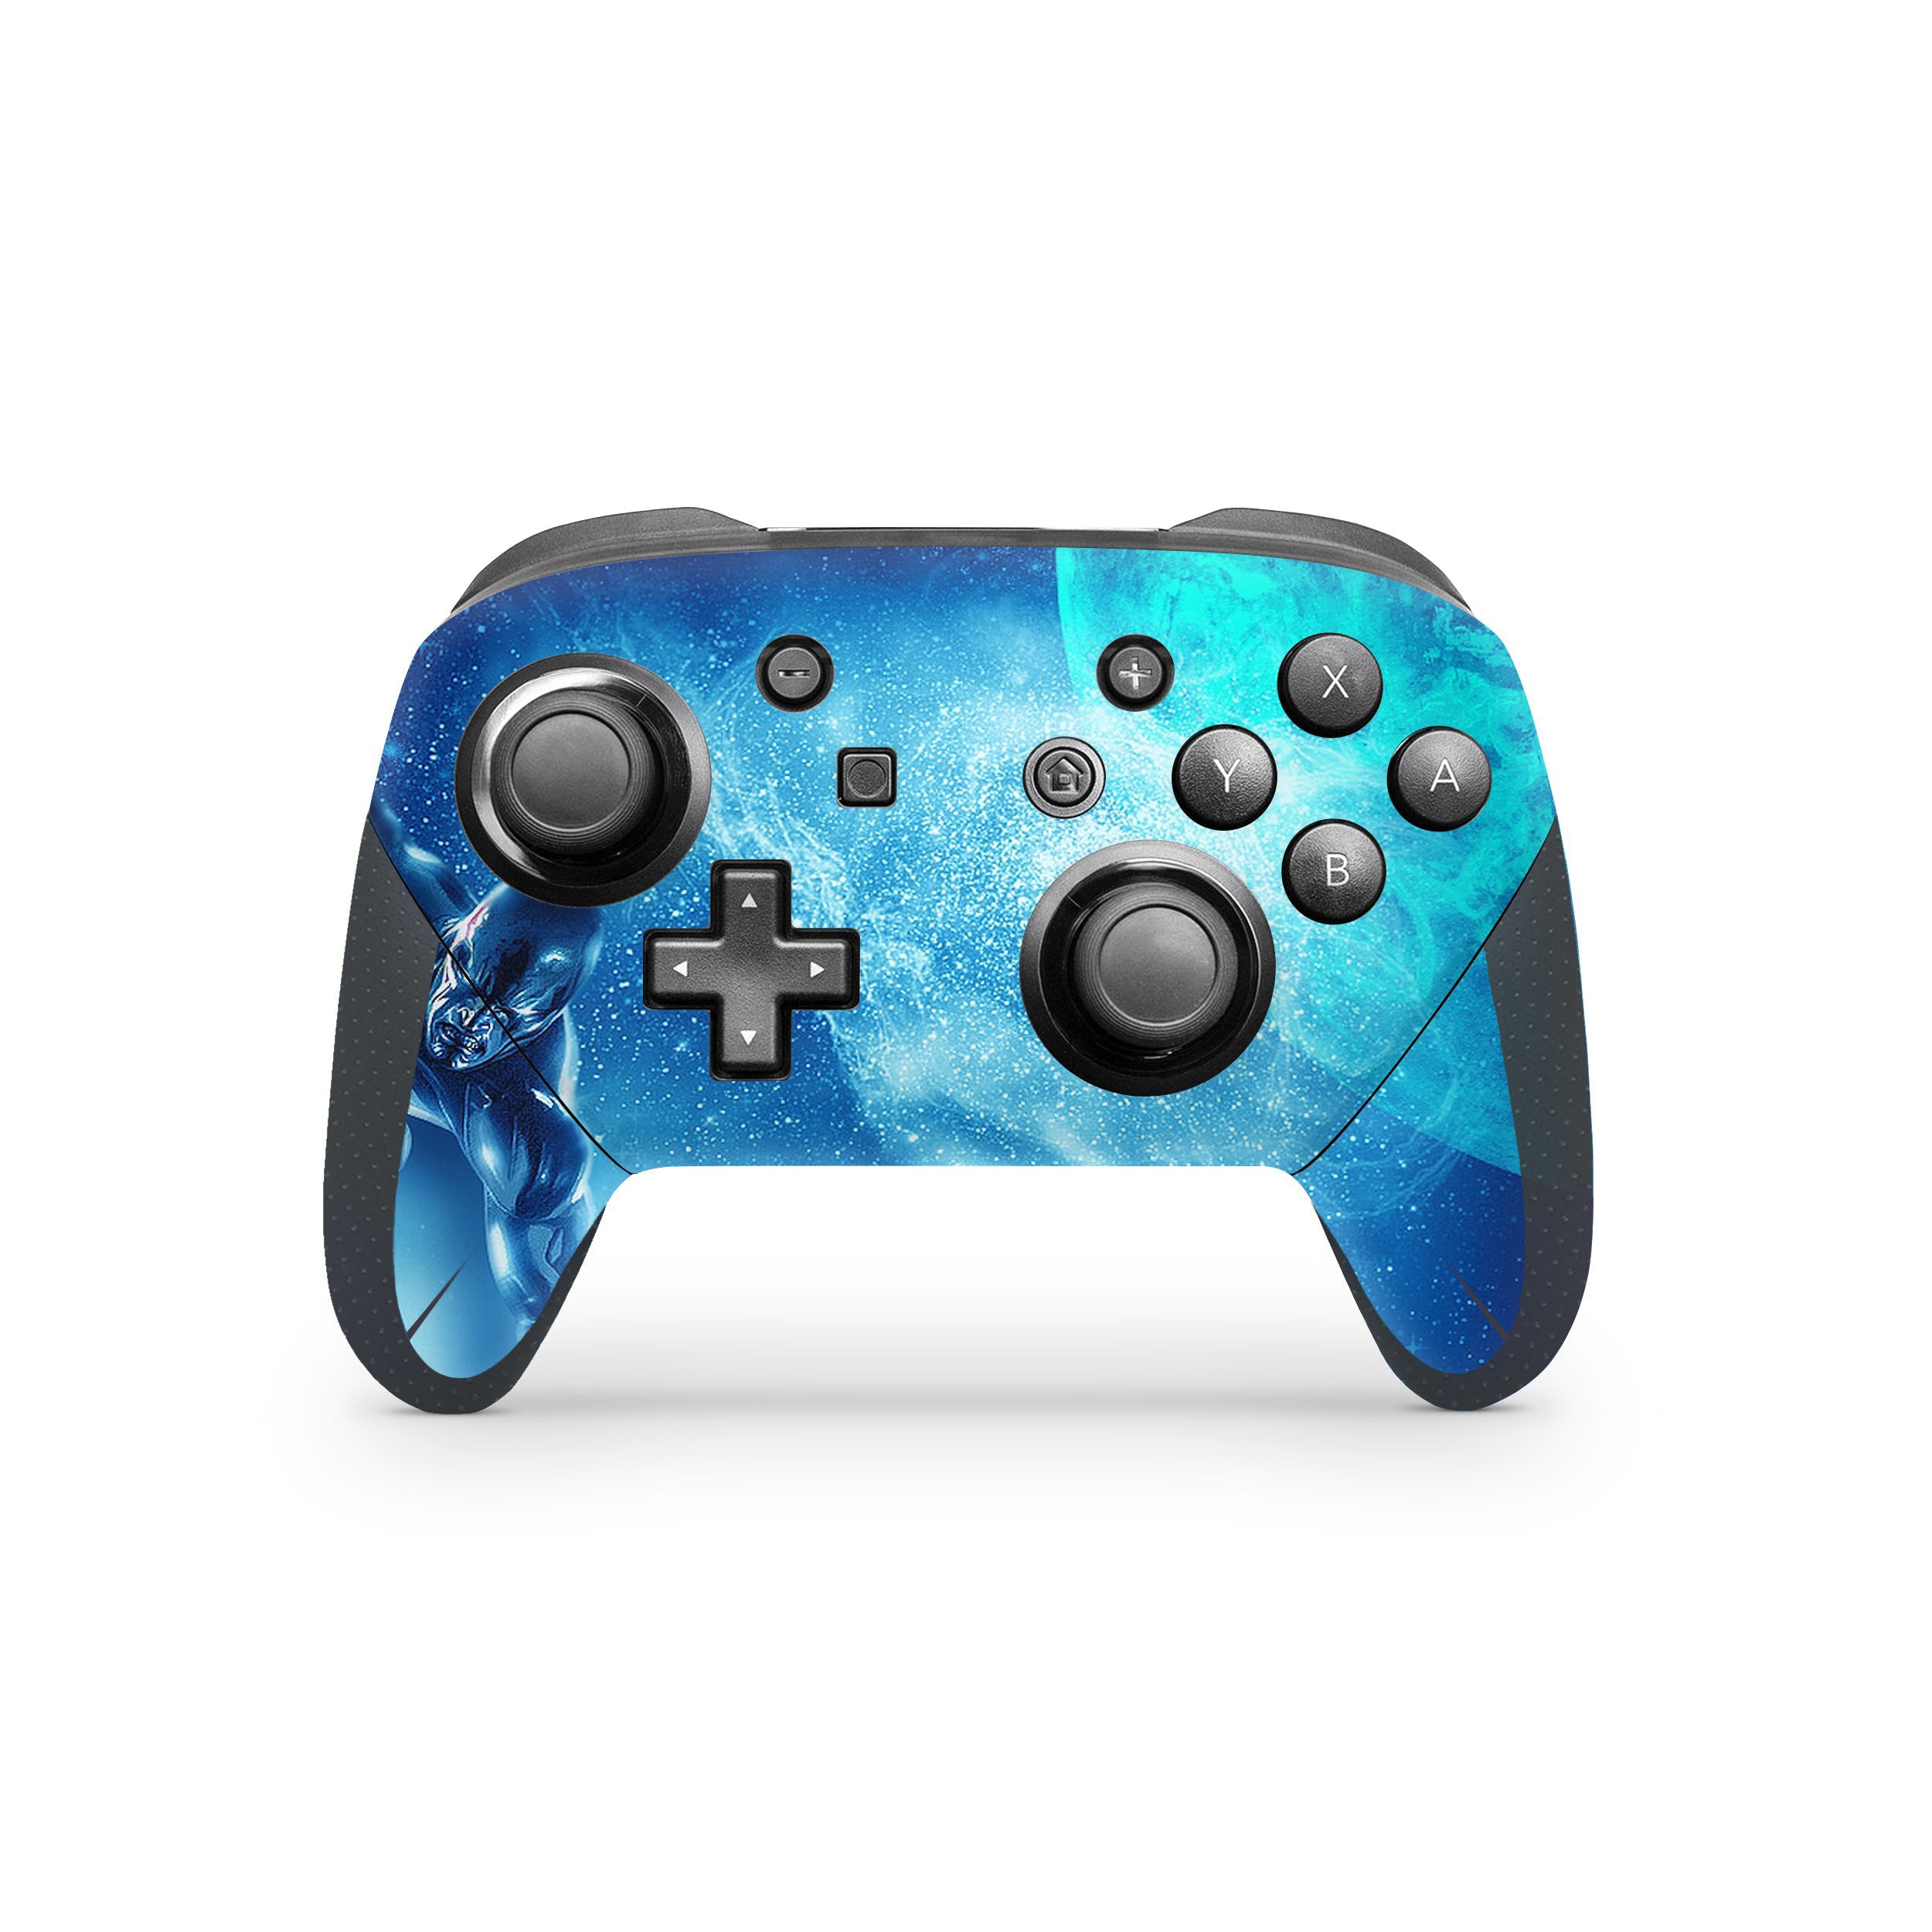 A video game skin featuring a Marvel Comics Silver Surfer design for the Switch Pro Controller.